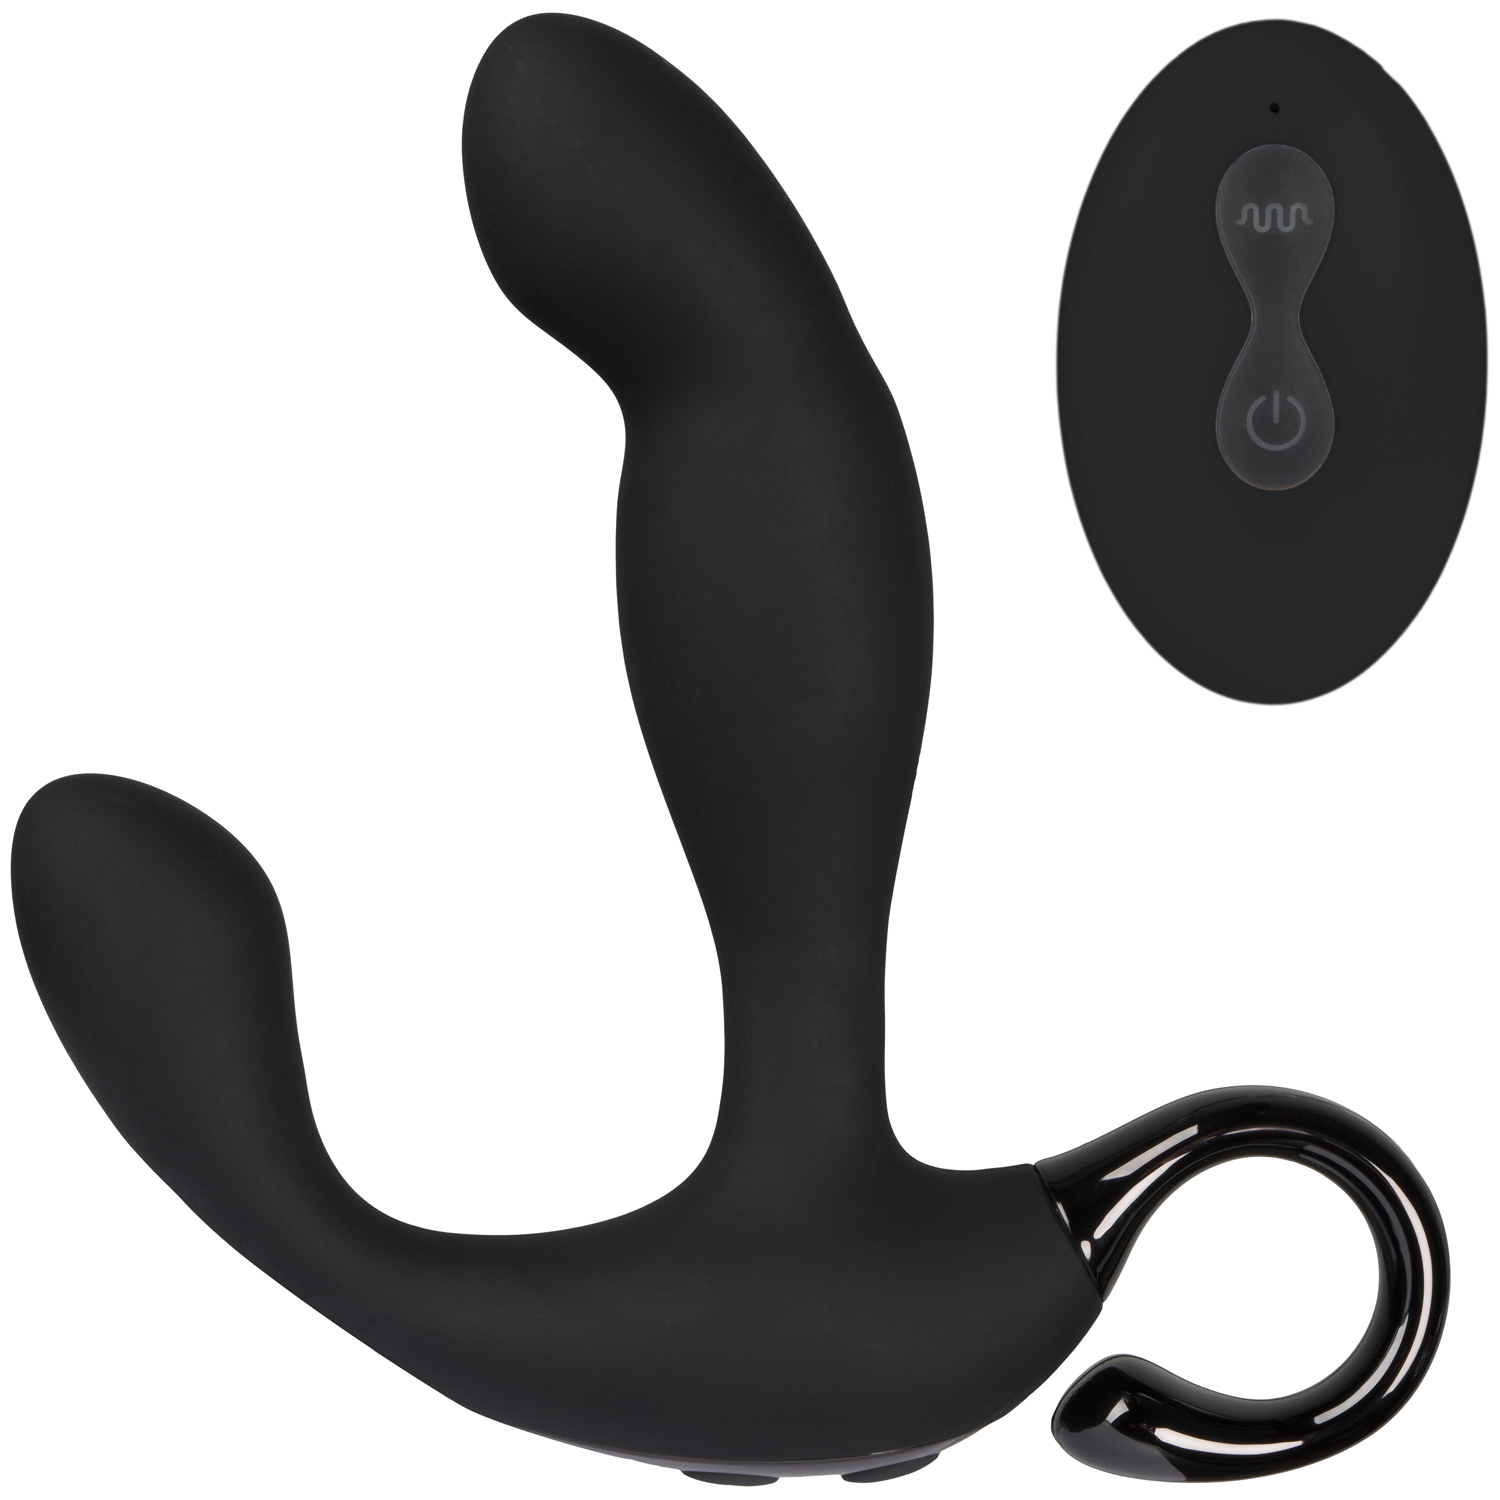 Sinful Come-hither Opladelig Prostata Vibrator - Black thumbnail